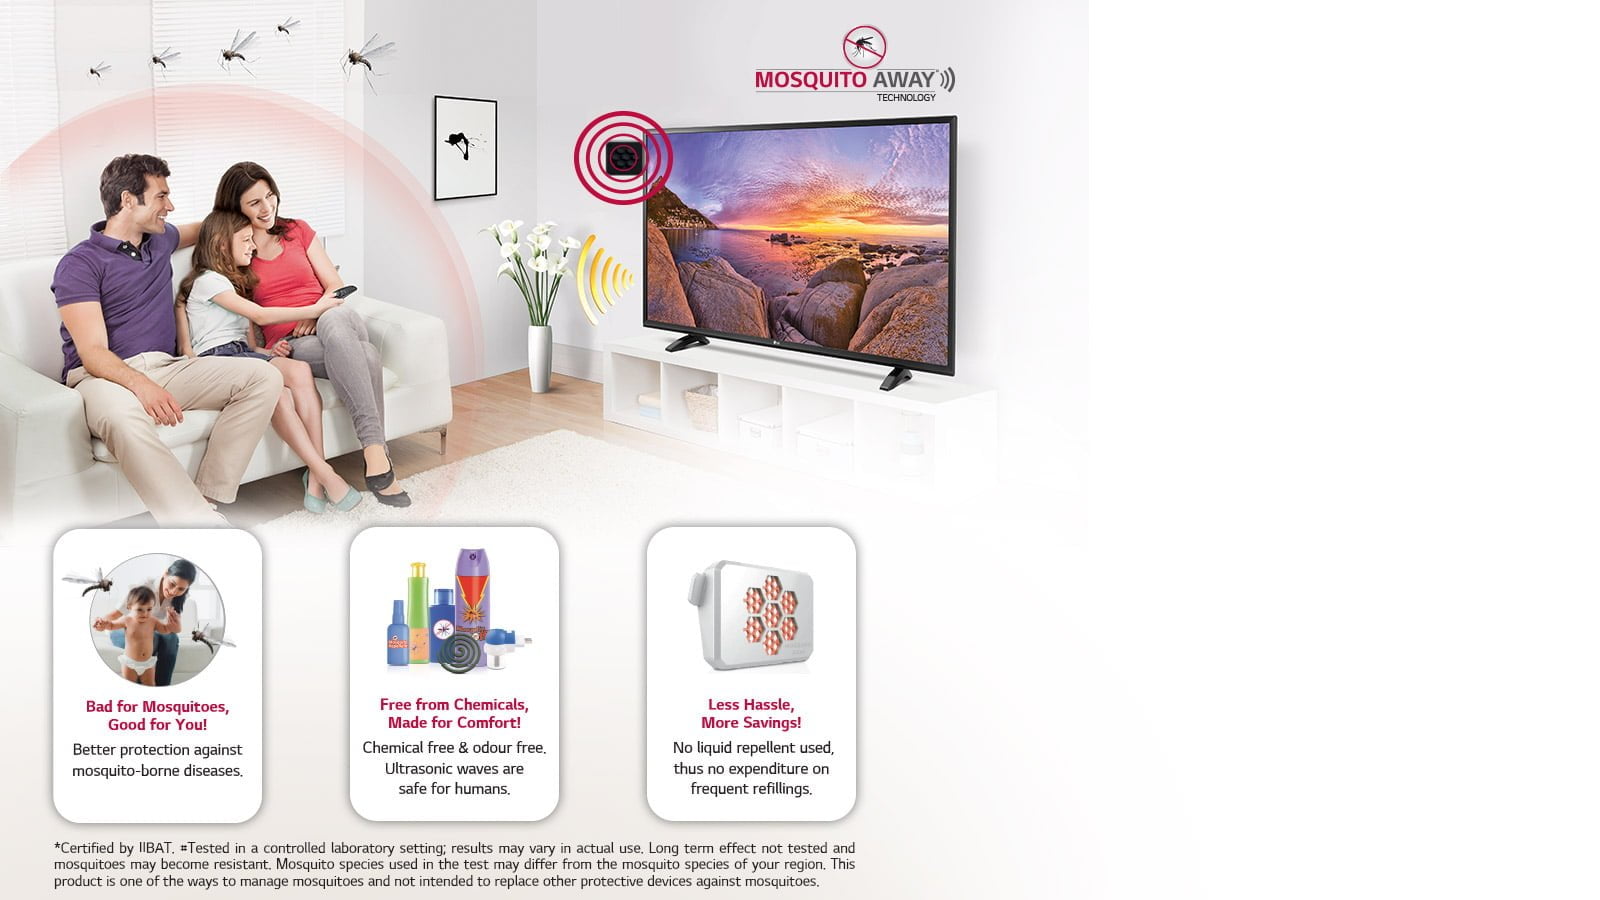 LG Mosquito Away Feature in LED TV